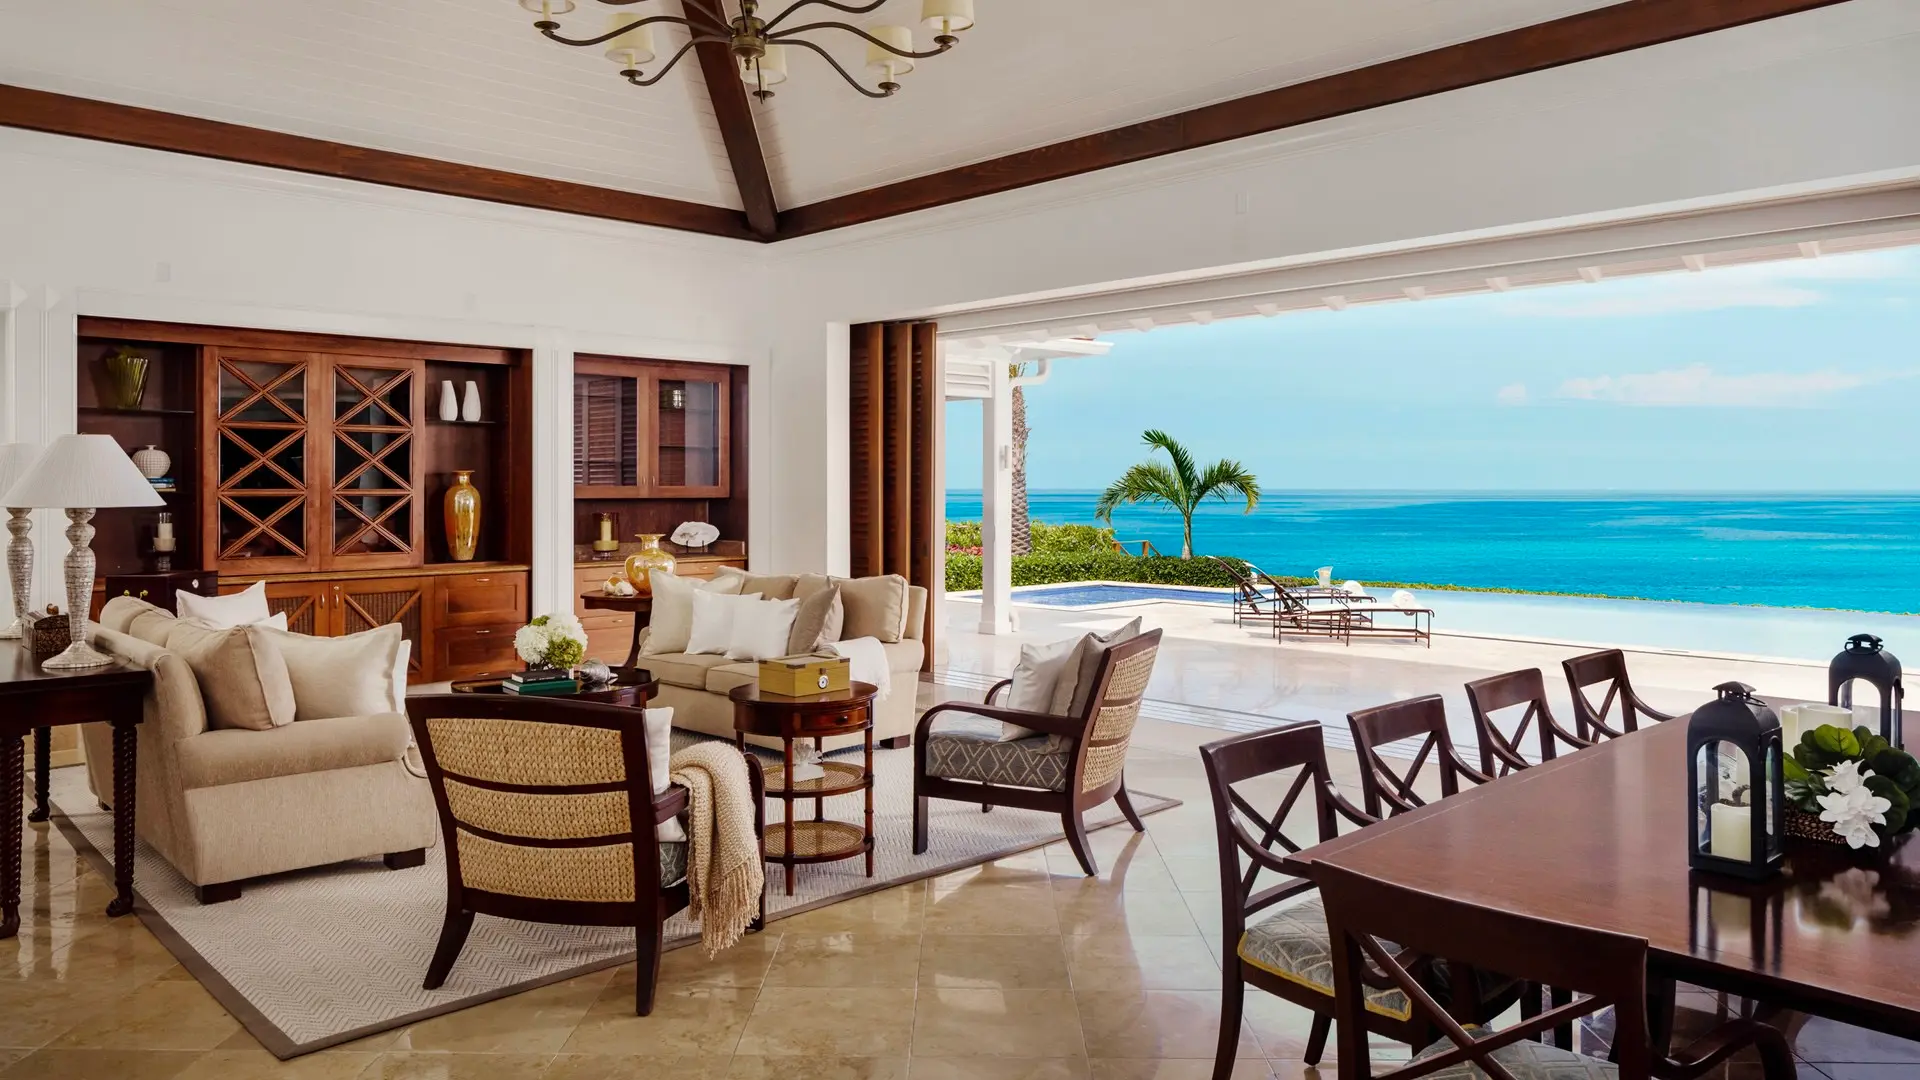 Hotel review What We Love' - The Ocean Club, A Four Seasons Resort - 1